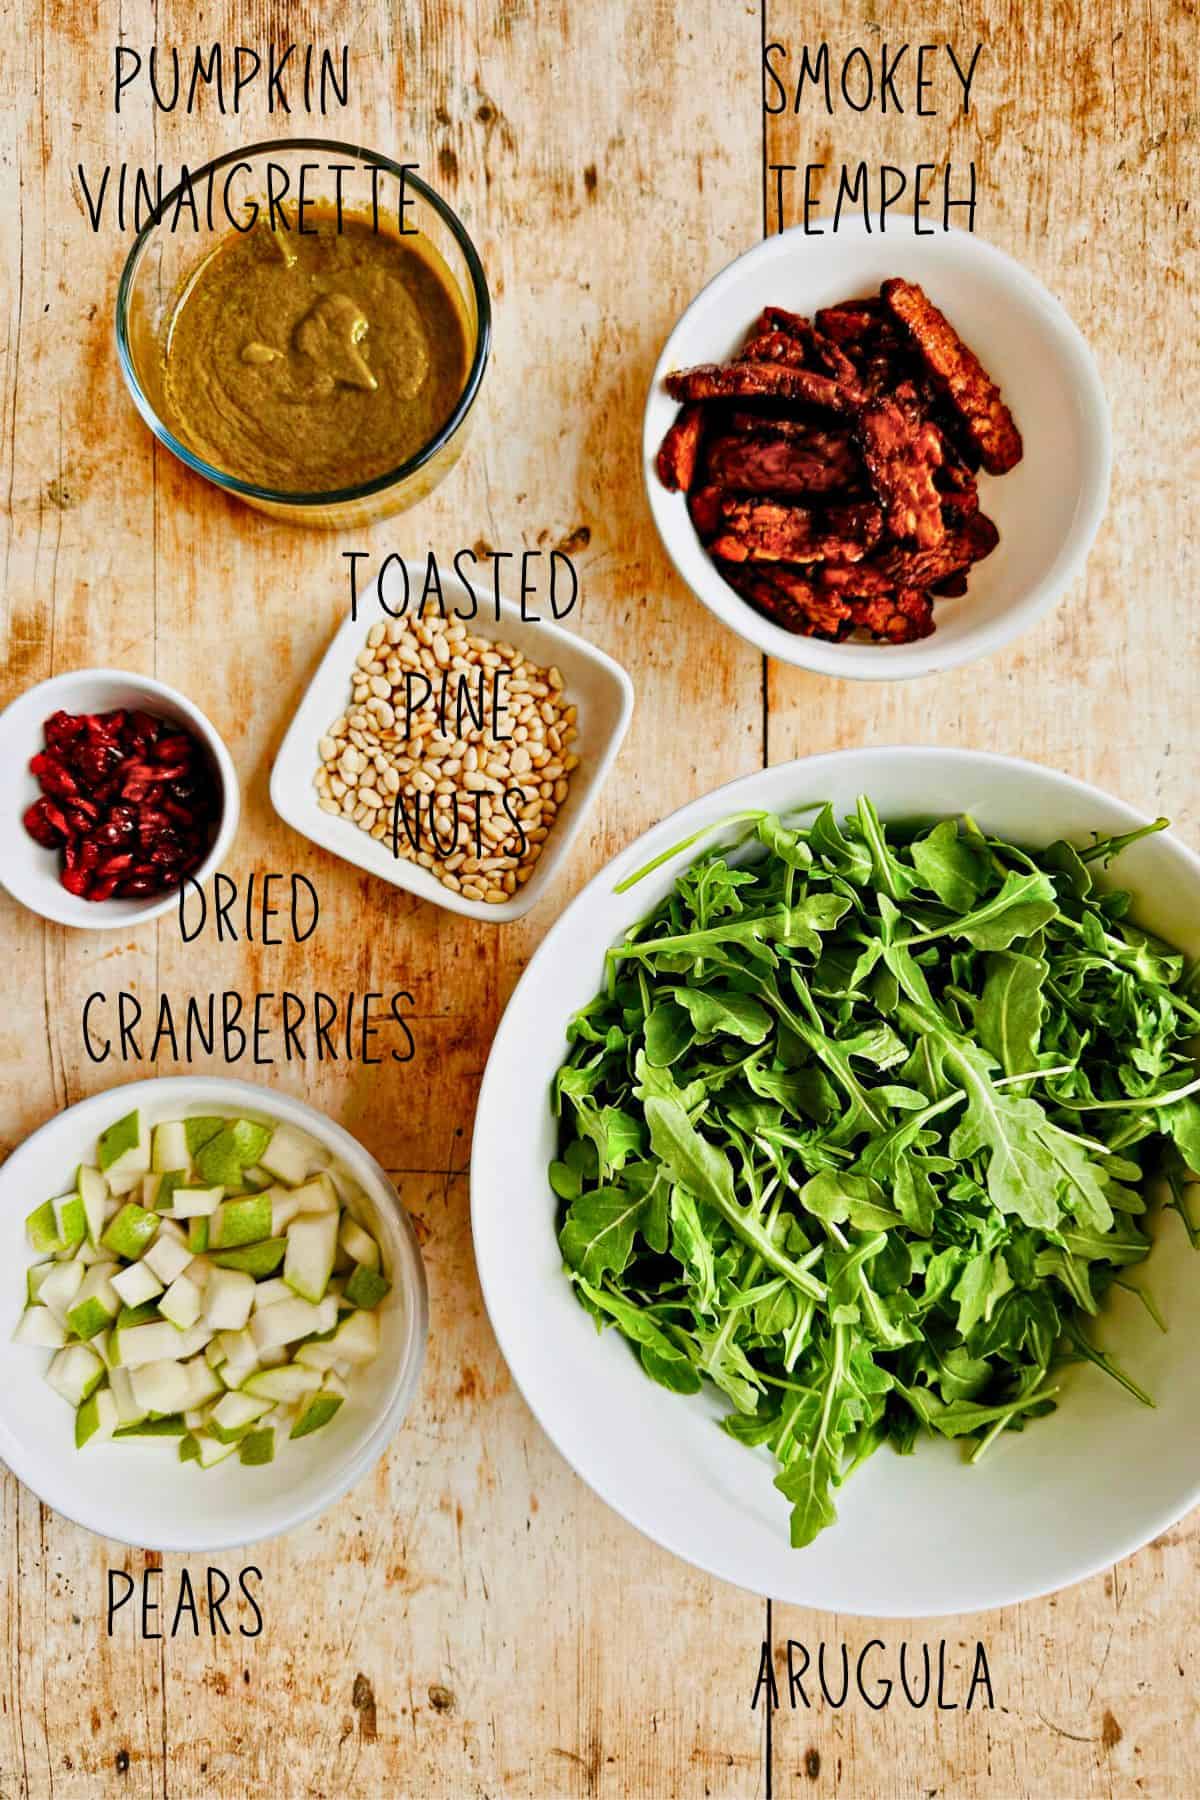 ingredients for arugula and pear salad with pumpkin vinaigrette in bowls